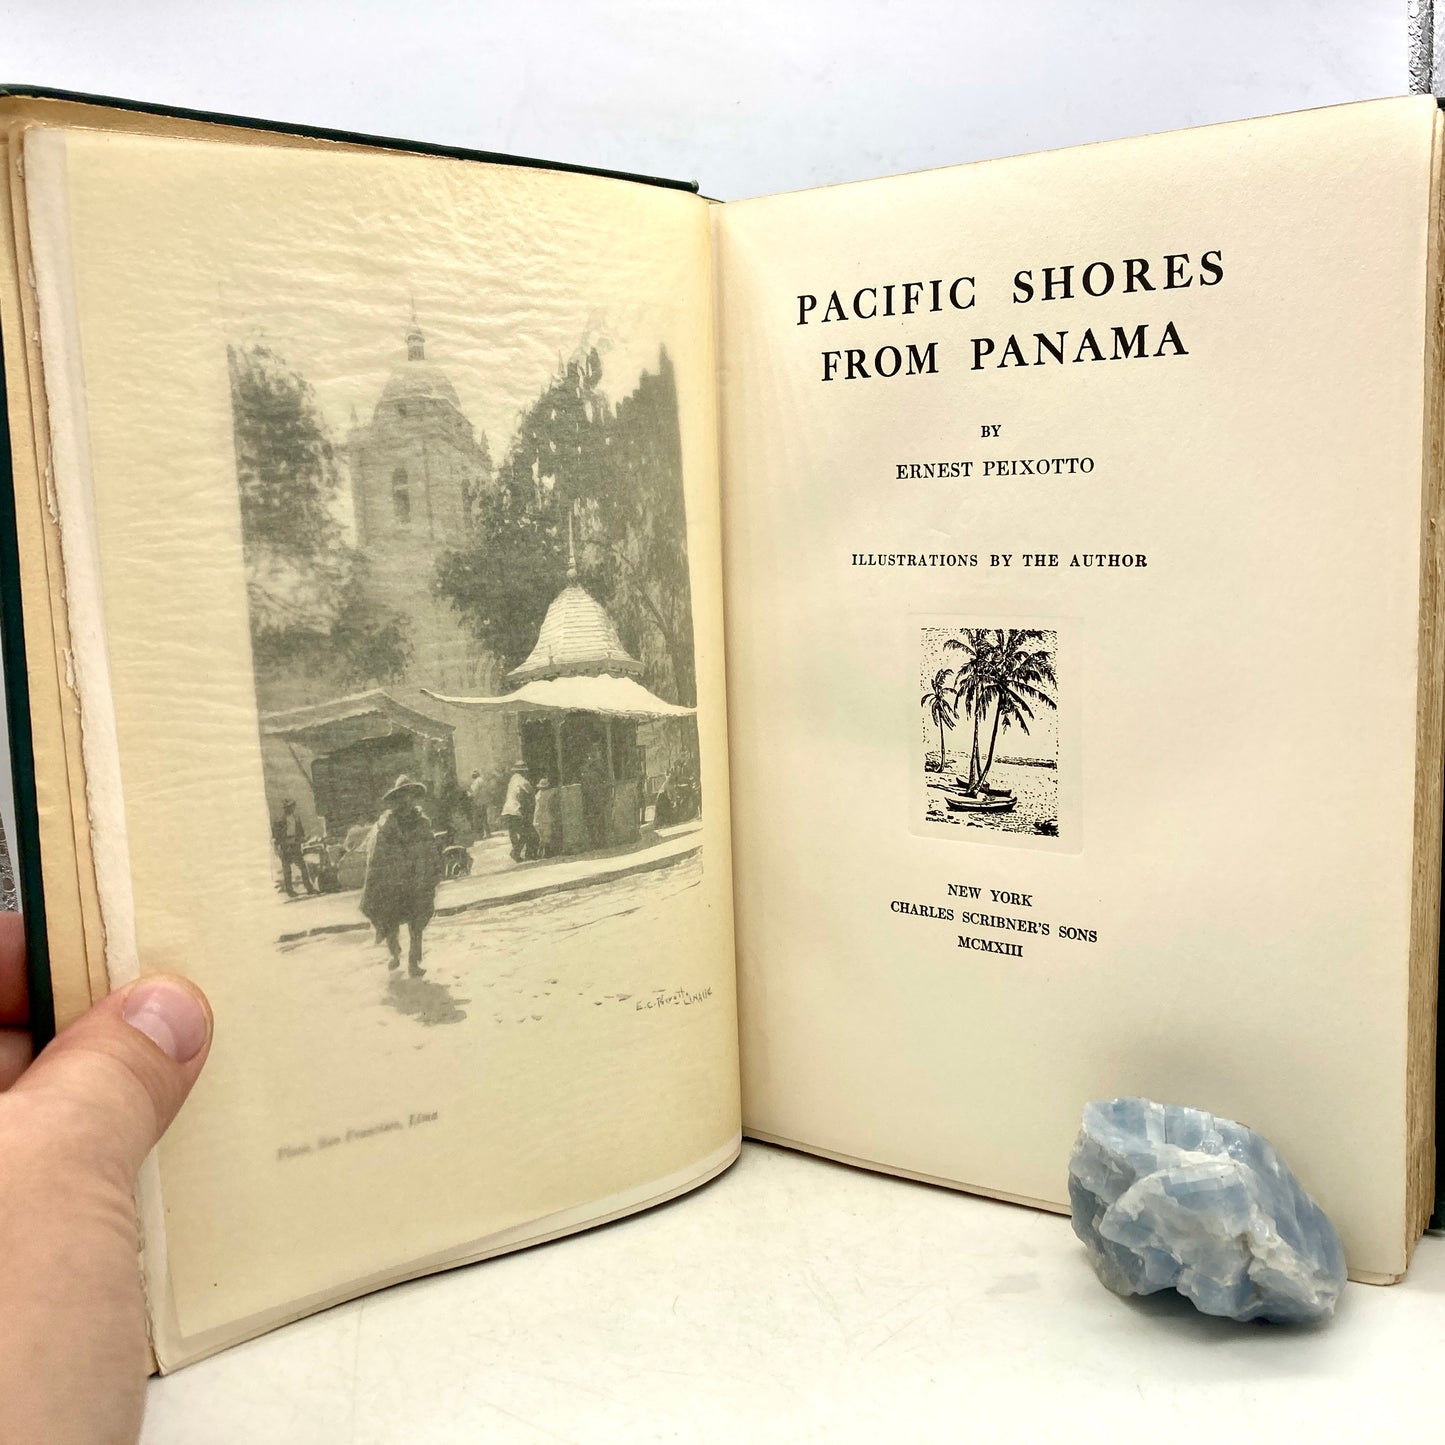 PEIXOTTO, Ernest "Pacific Shows From Panama" [Scribner's, 1913]